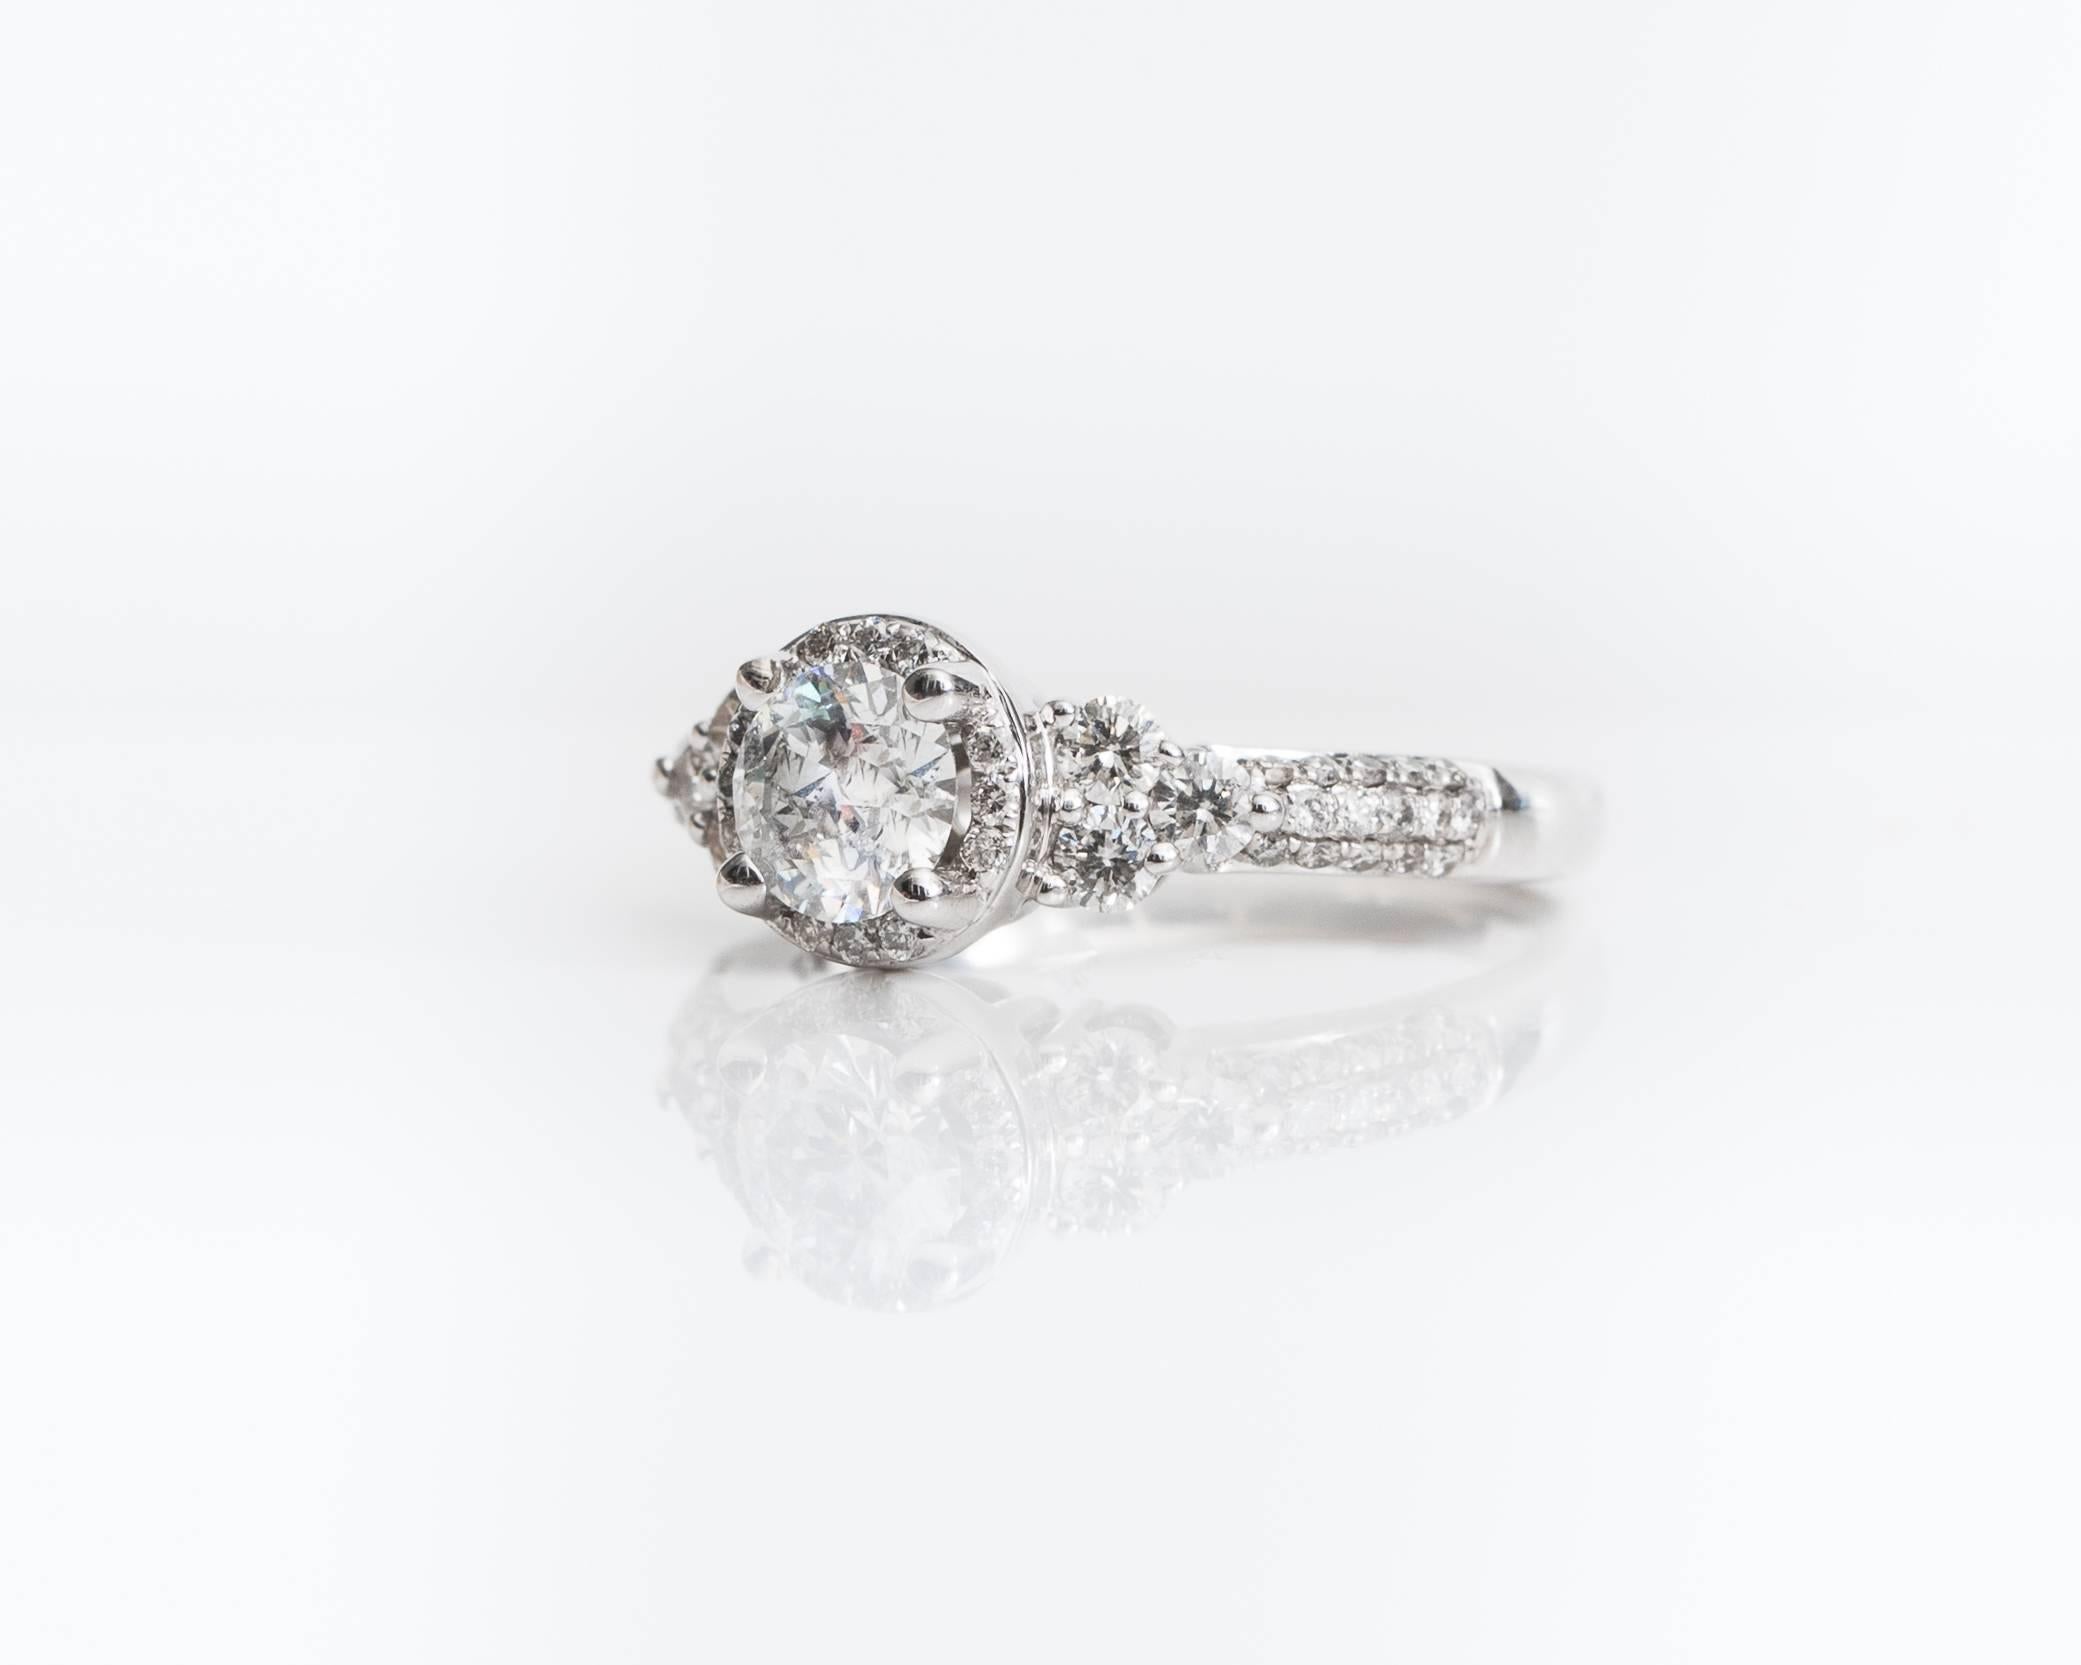 This gorgeous Diamond Engagement Ring features a .75 Carat Round Brilliant Diamond prong set in a 14 Karat White Gold Cathedral Mounting. The center stone is surrounded by a Halo of round brilliant diamonds. The front half of the ring shank is set